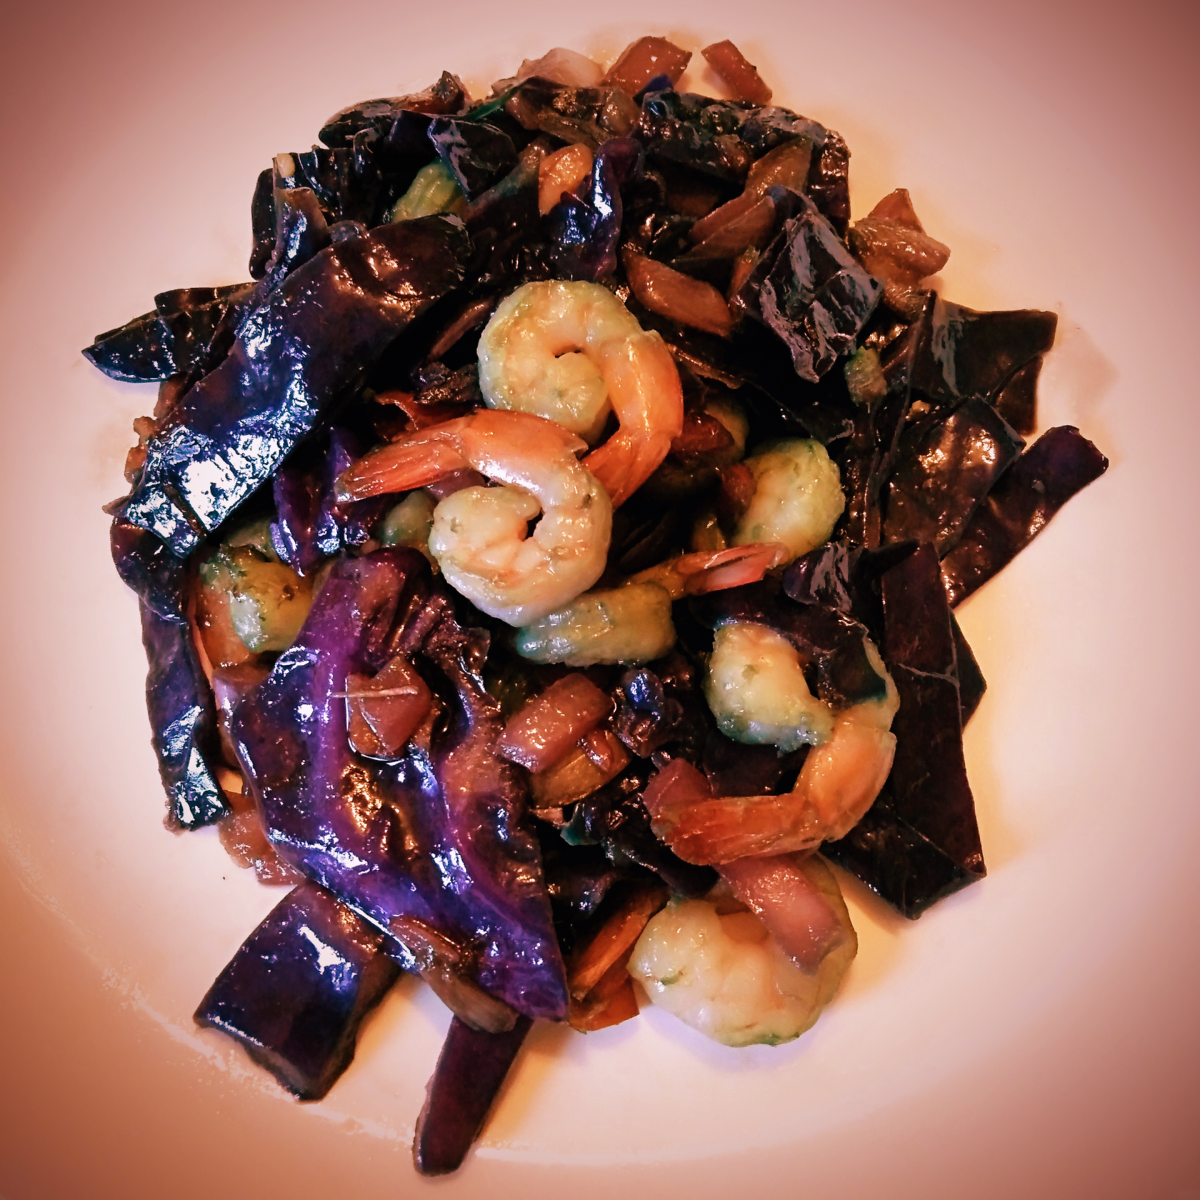 How to Make an Antioxidant-Rich Salad With Purple Cabbage and Prawns